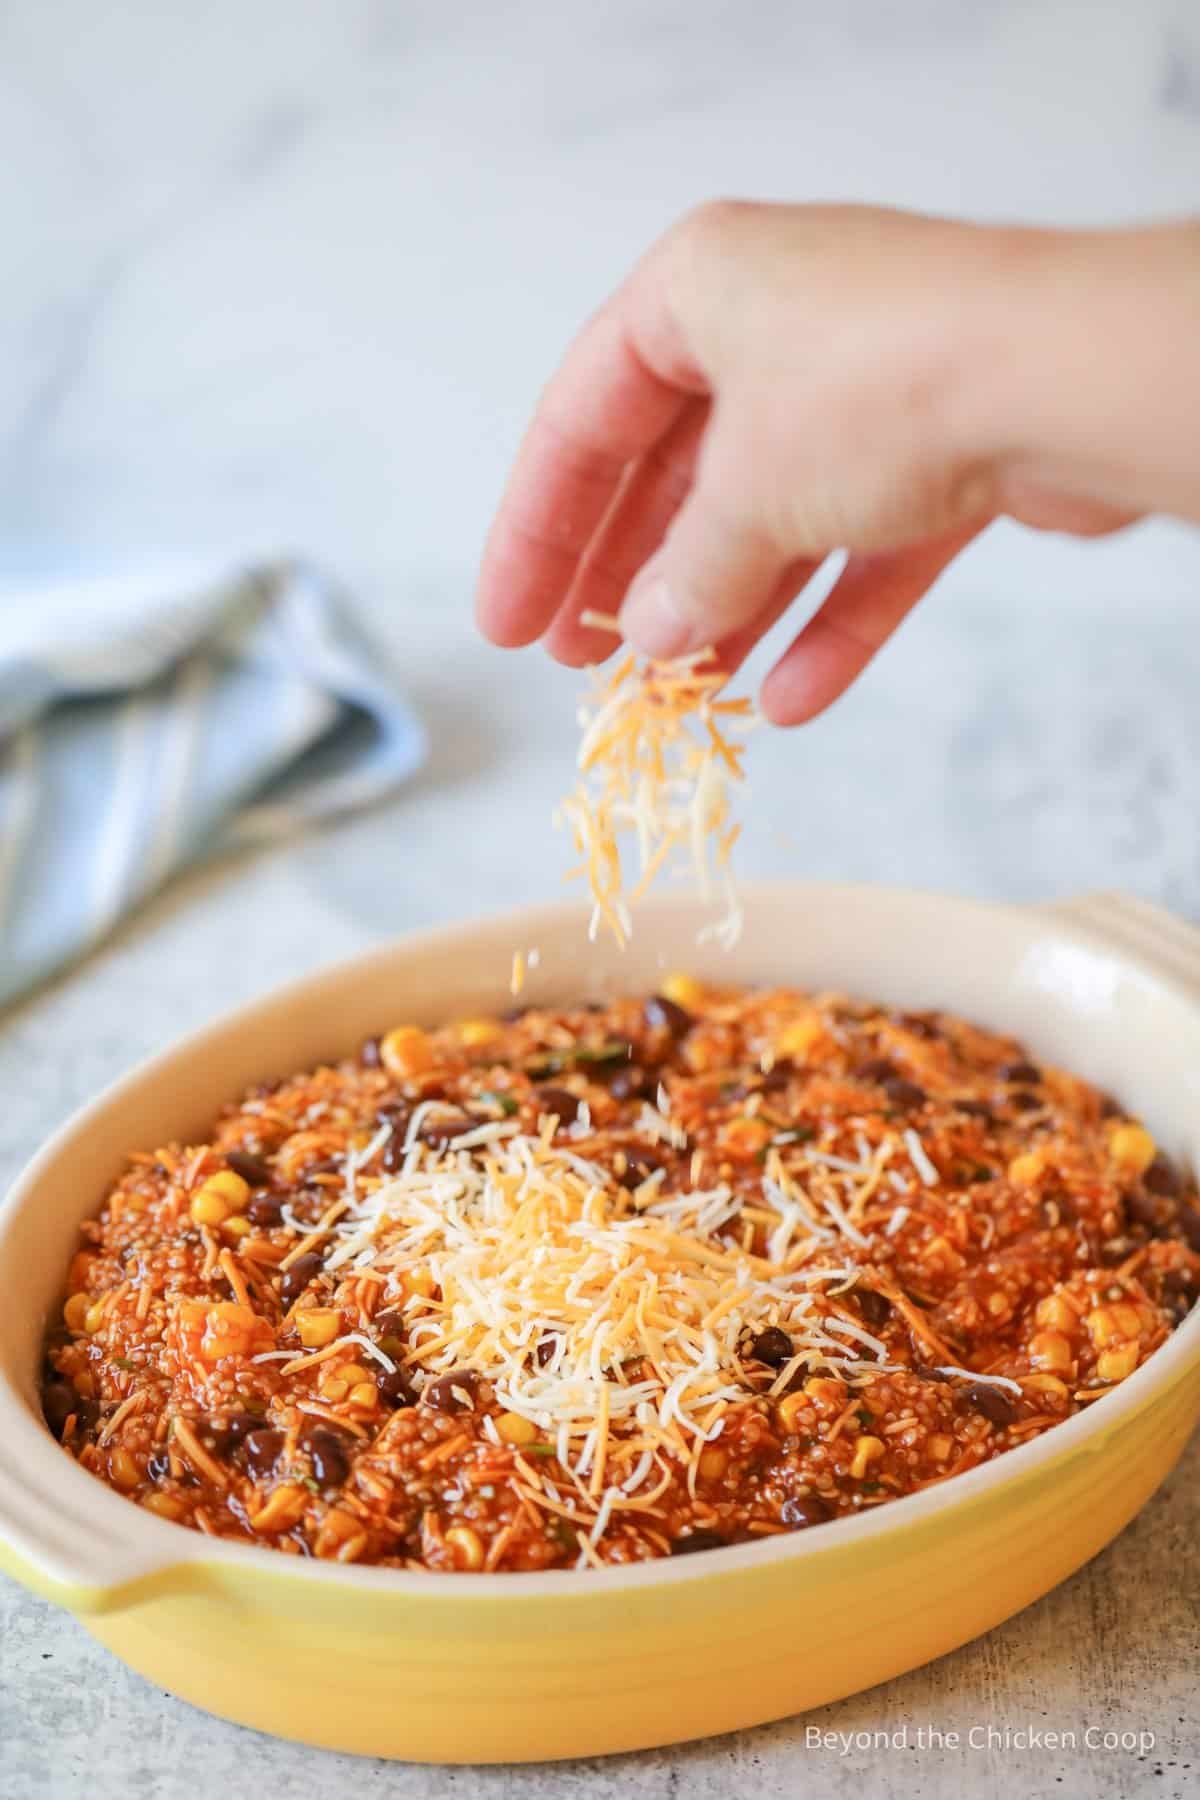 Sprinkling cheese over a casserole dish.